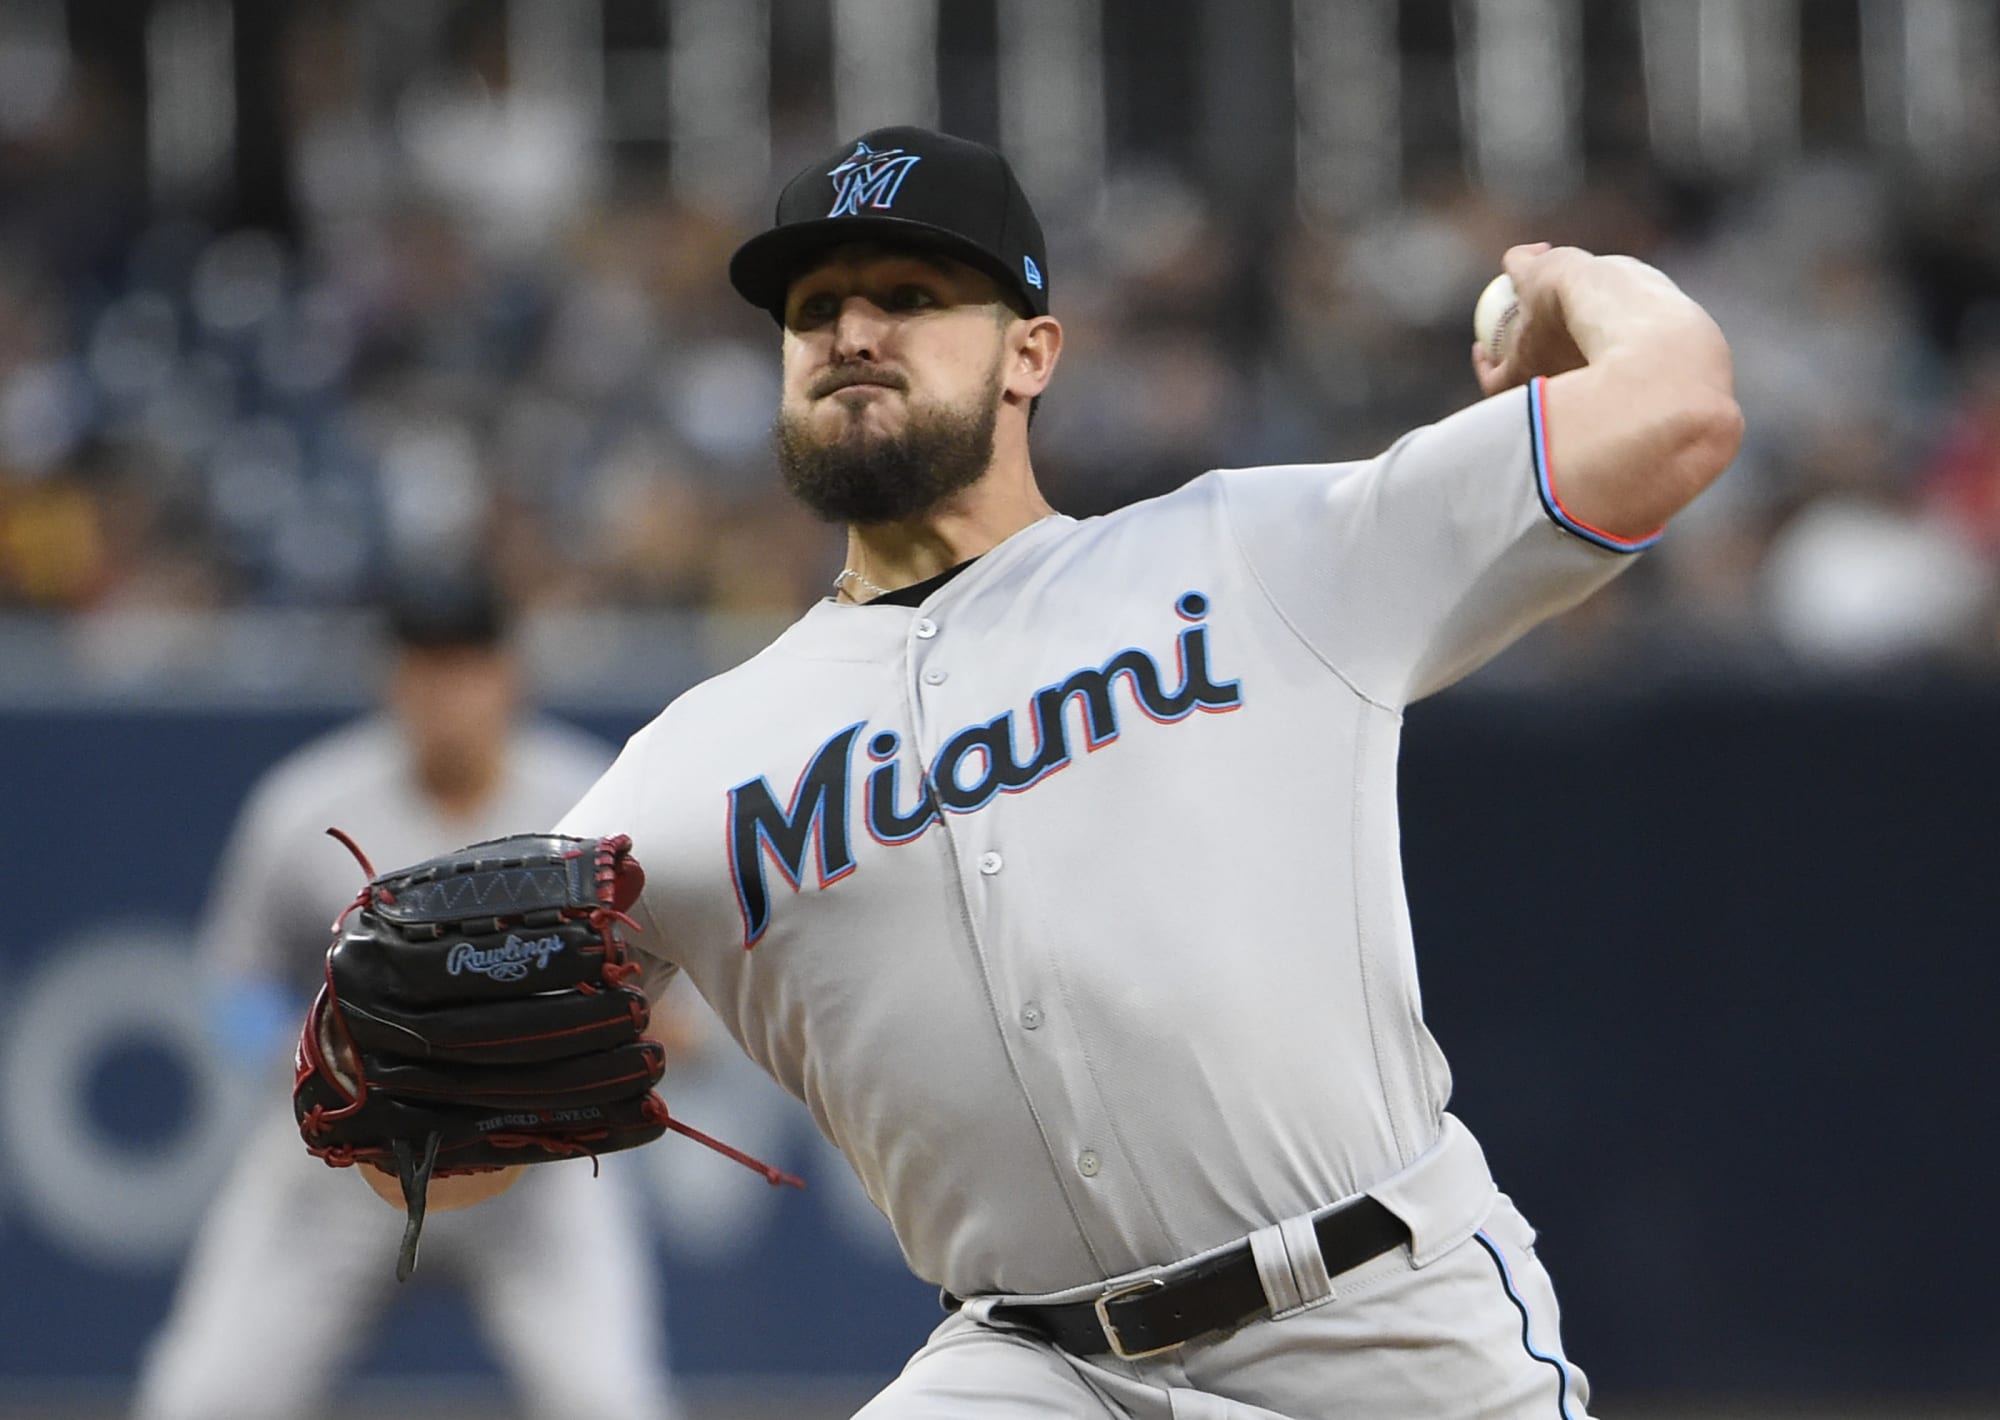 Will the Marlins make pitching moves prior to the start of the season?